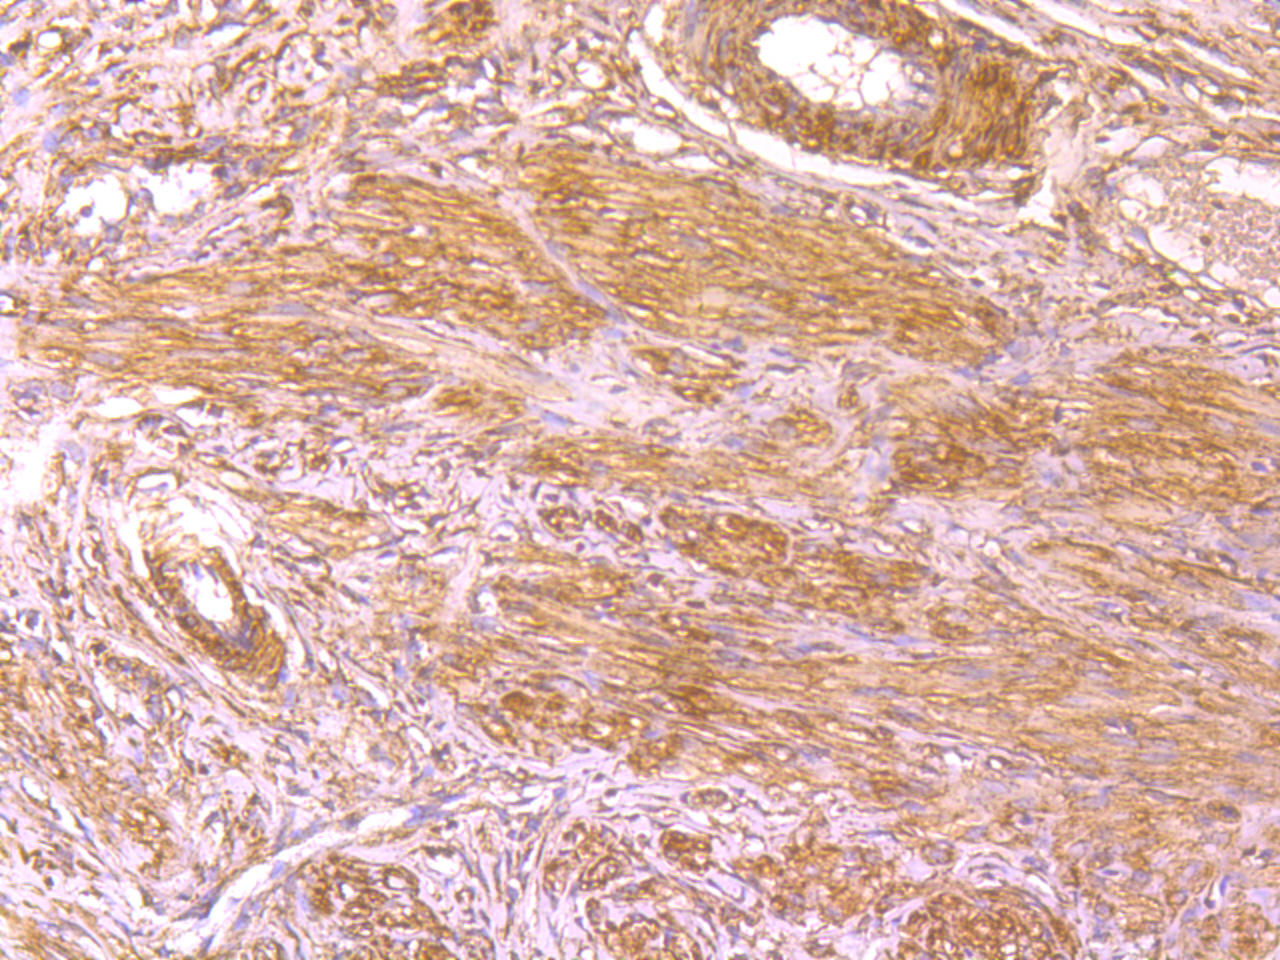 Immunohistochemical analysis of paraffin-embedded rat cervix tissue using anti-BLCAP antibody. Counter stained with hematoxylin.